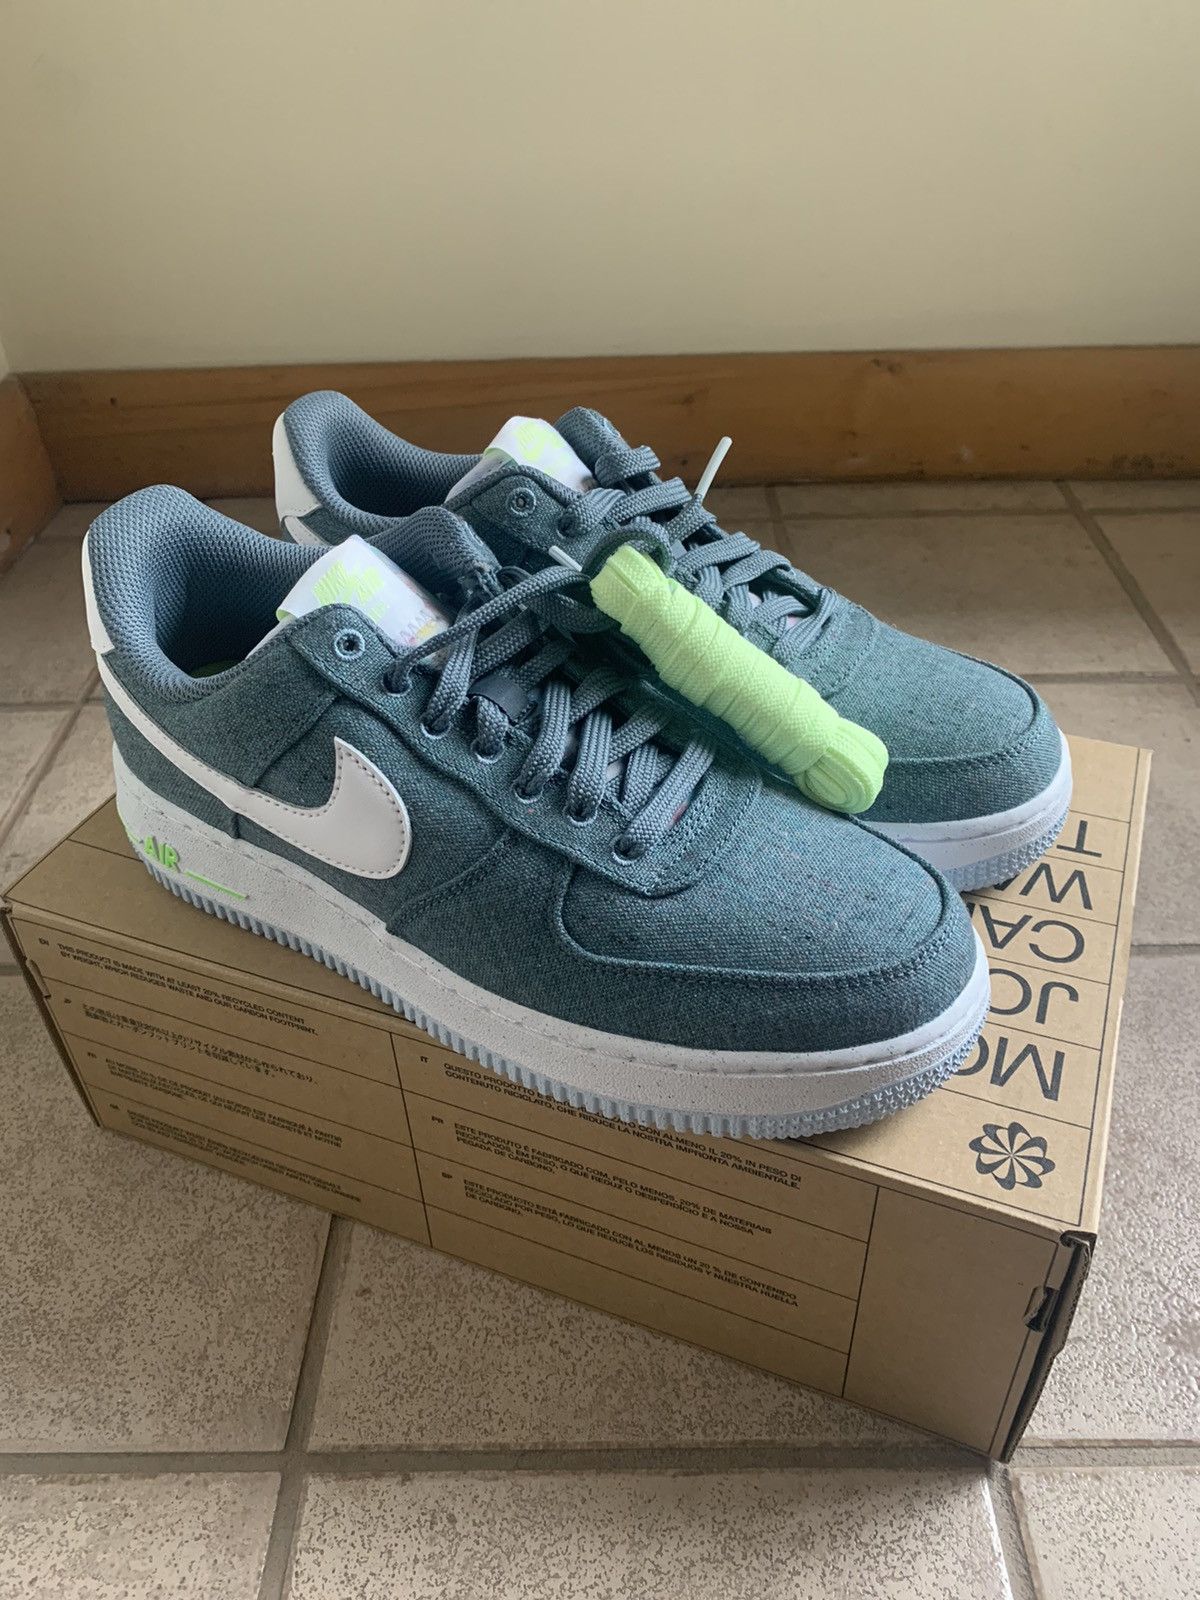 Nike Air Force 1 '07 LX canvas trainers in ozone blue